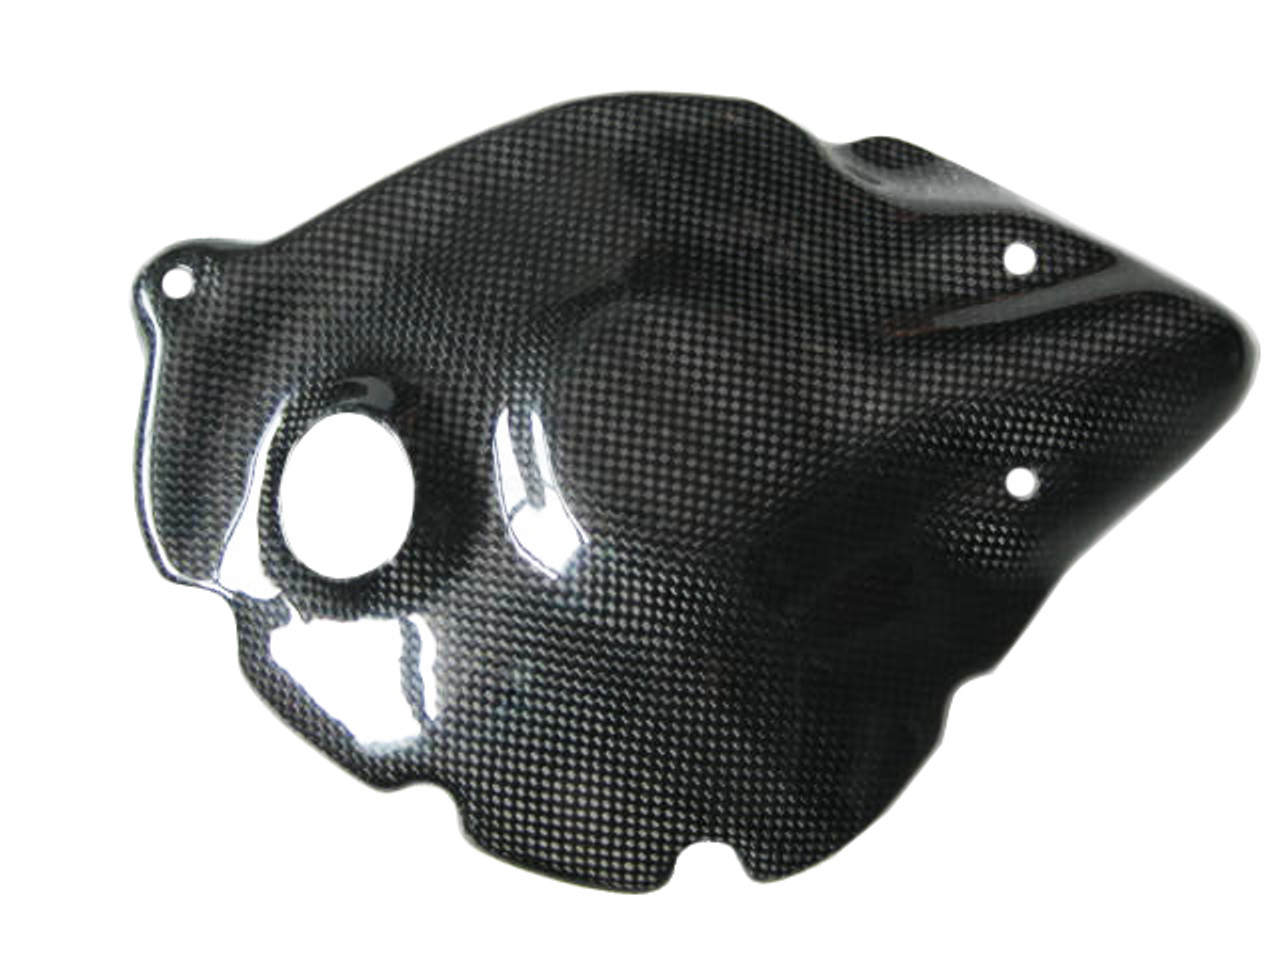 Glossy Plain Weave Carbon Fiber Clutch Cover Cover (Kevlar inside) for Yamaha R1 09-14